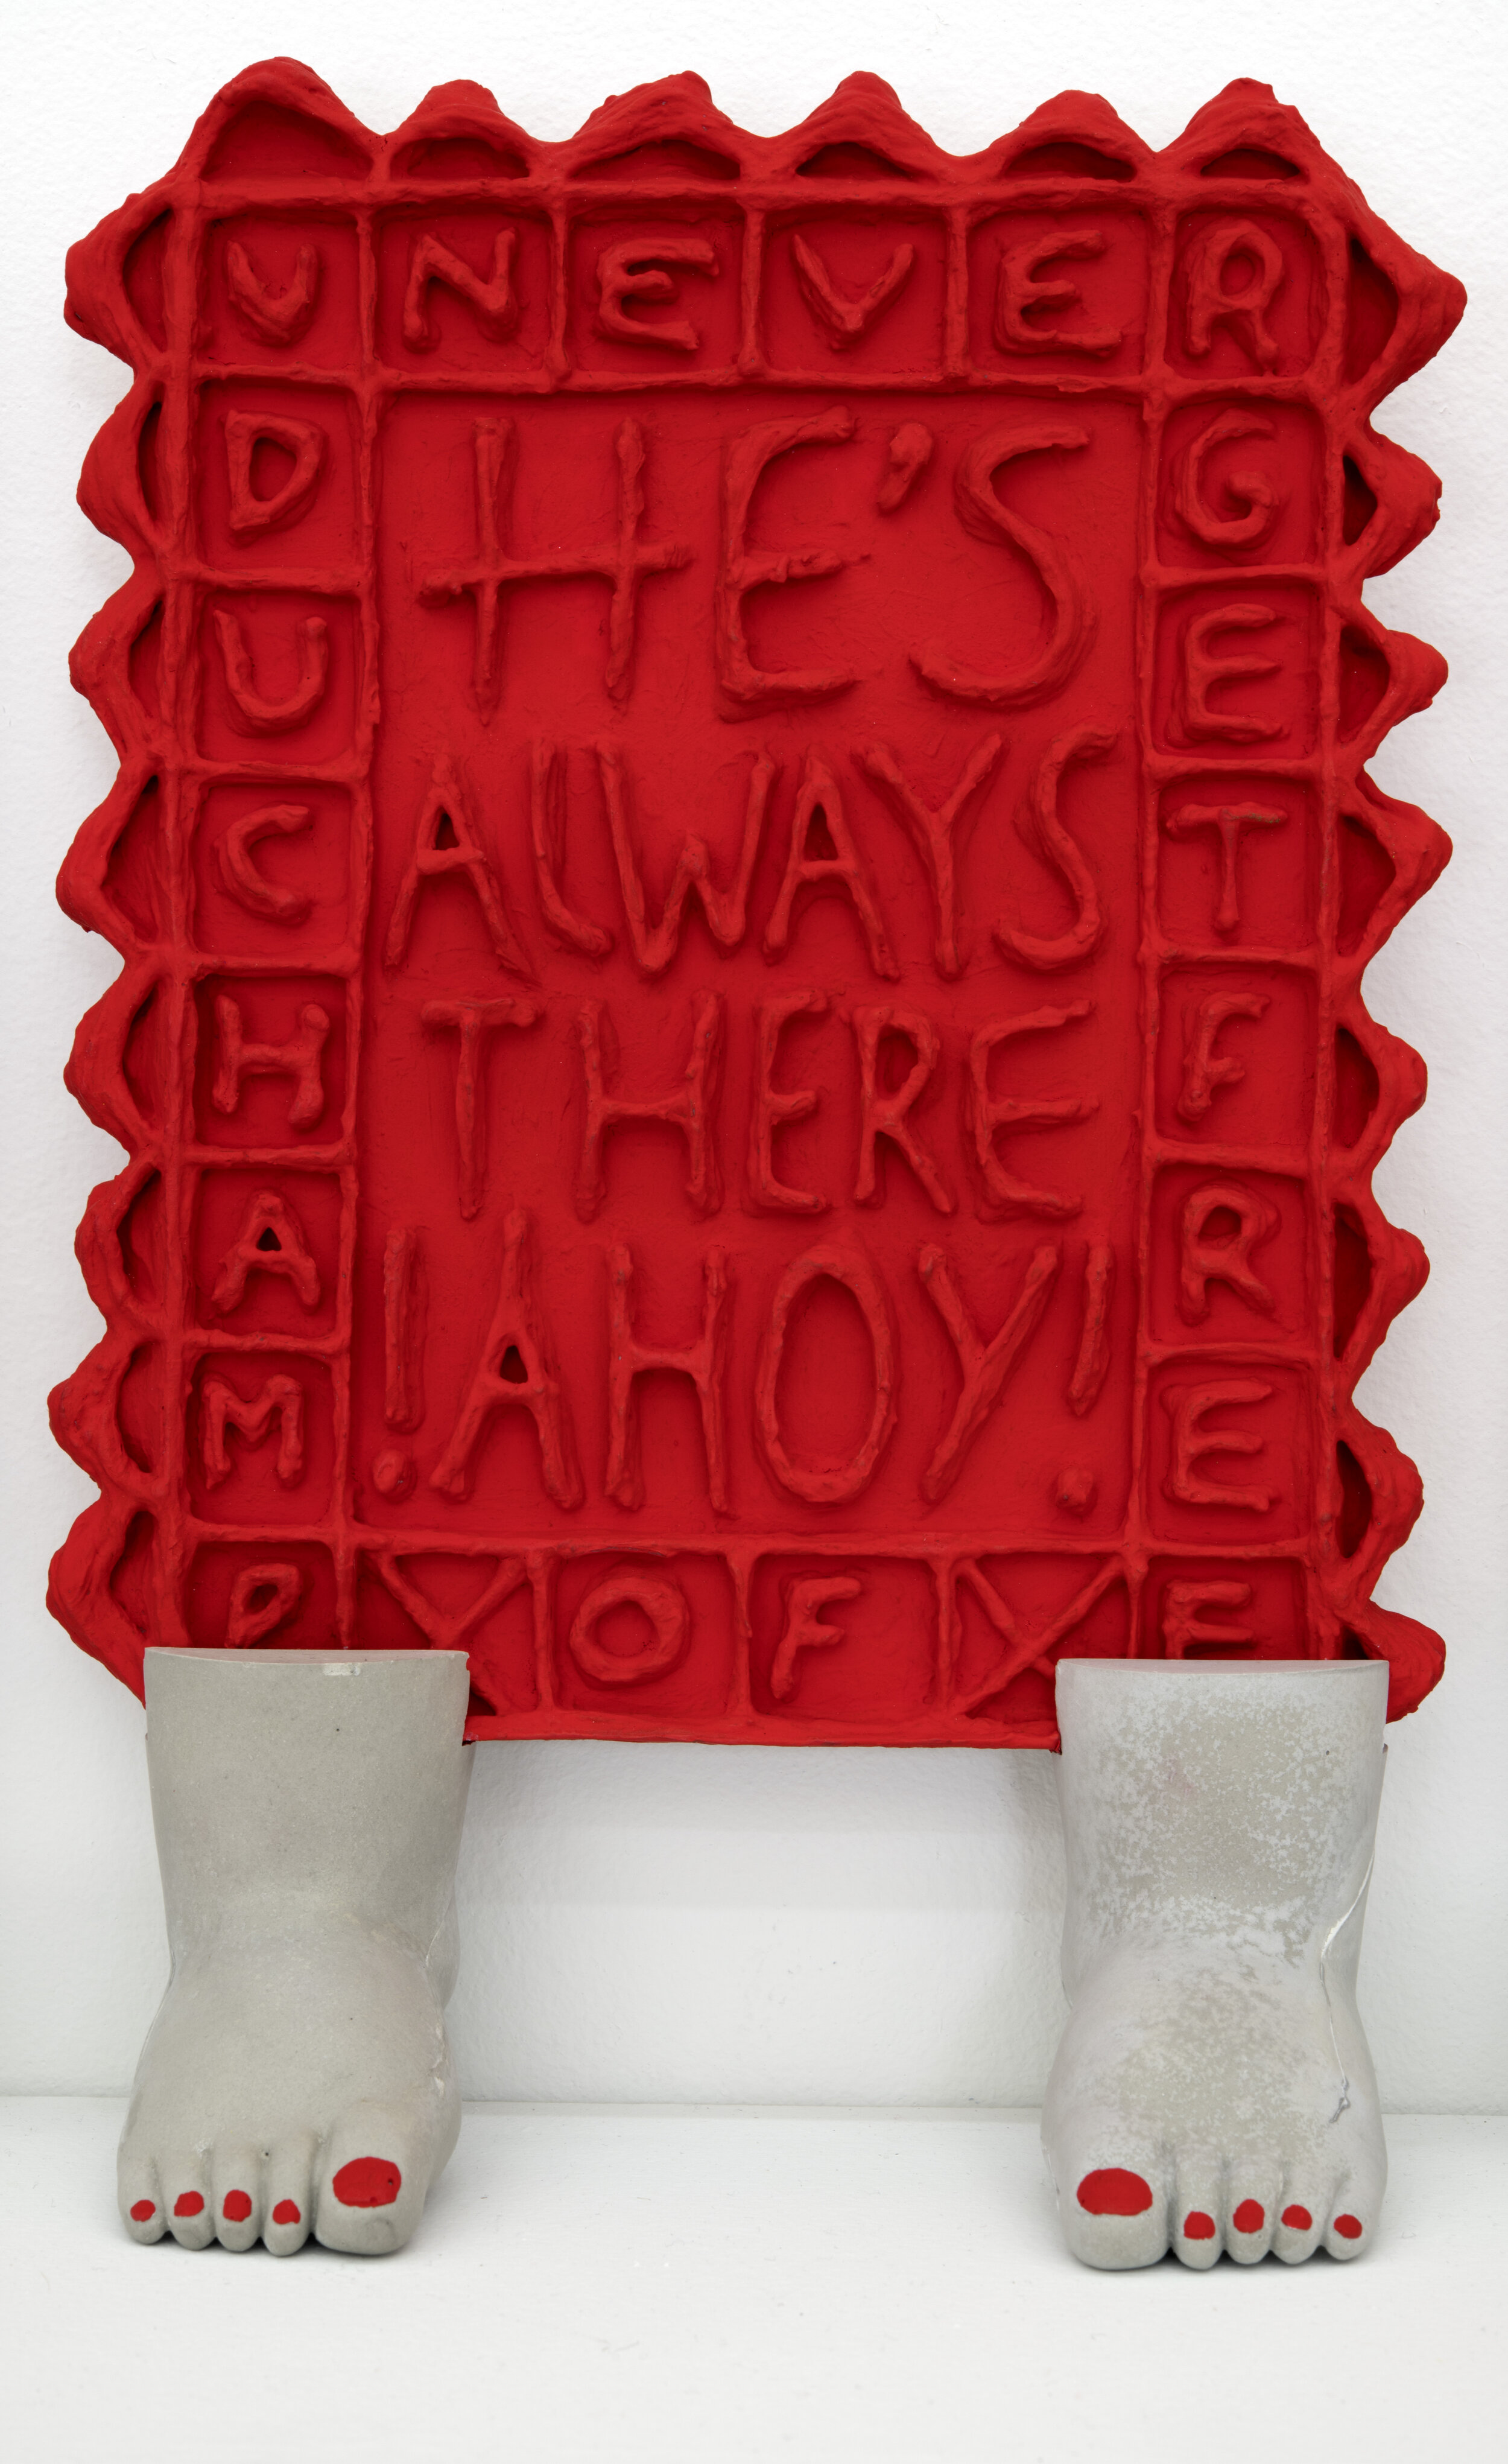 U Never Get Free of Duchamp, He’s Always There (Red)